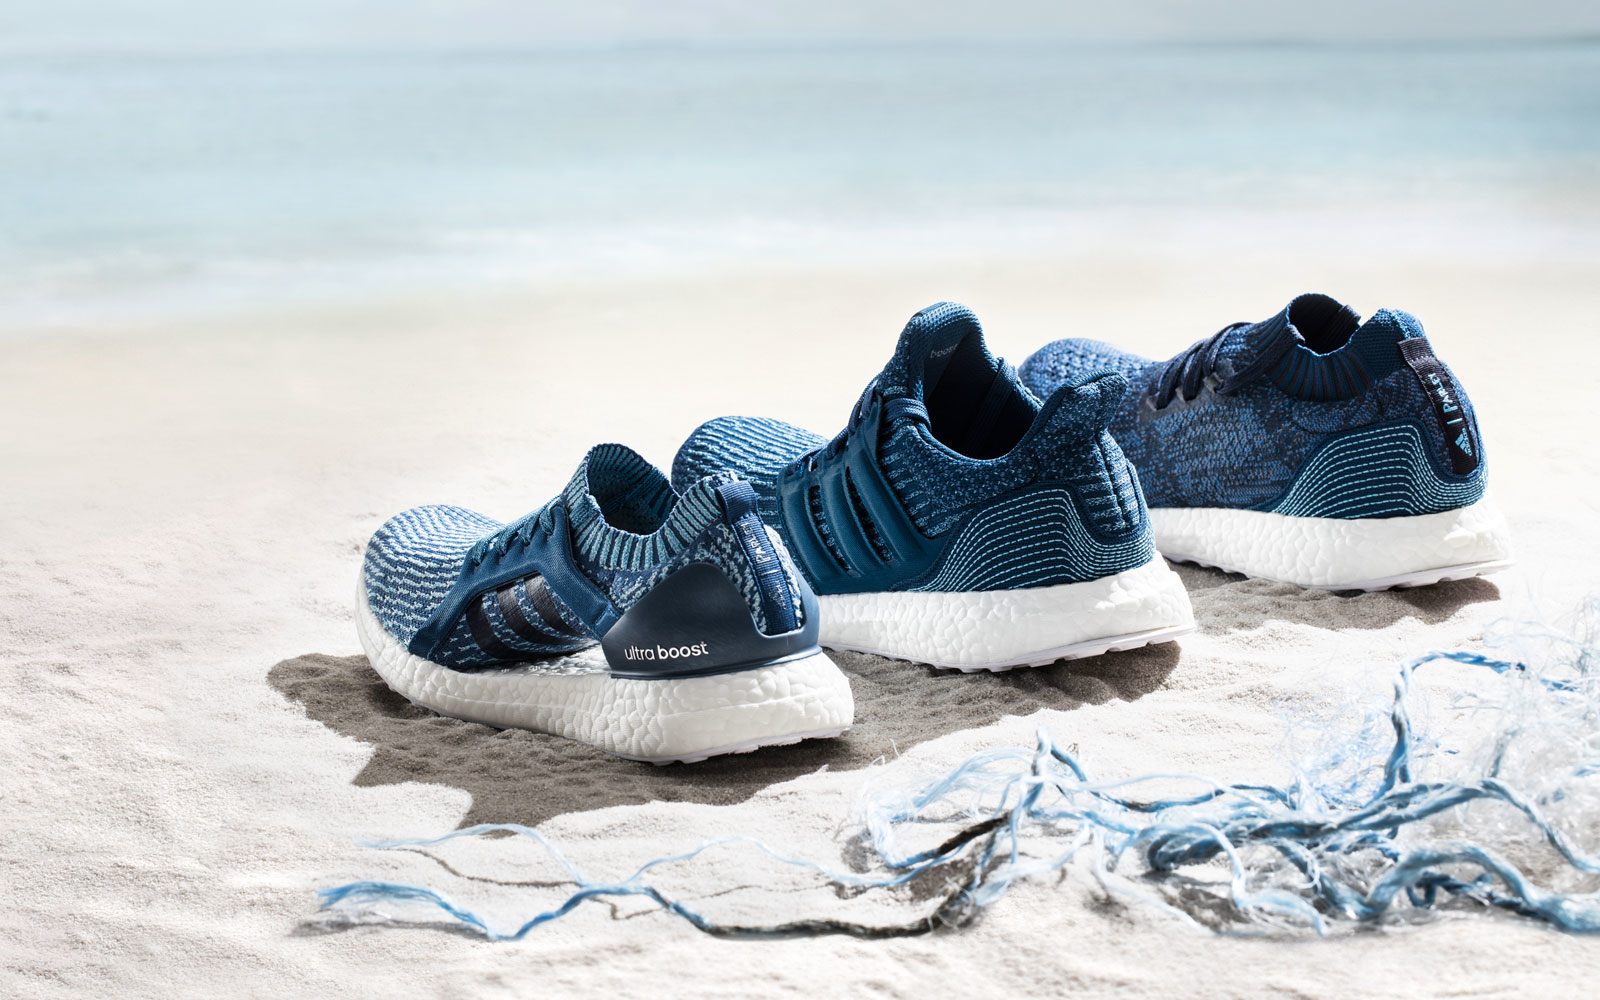 shoe made from recycled plastic waste from beaches